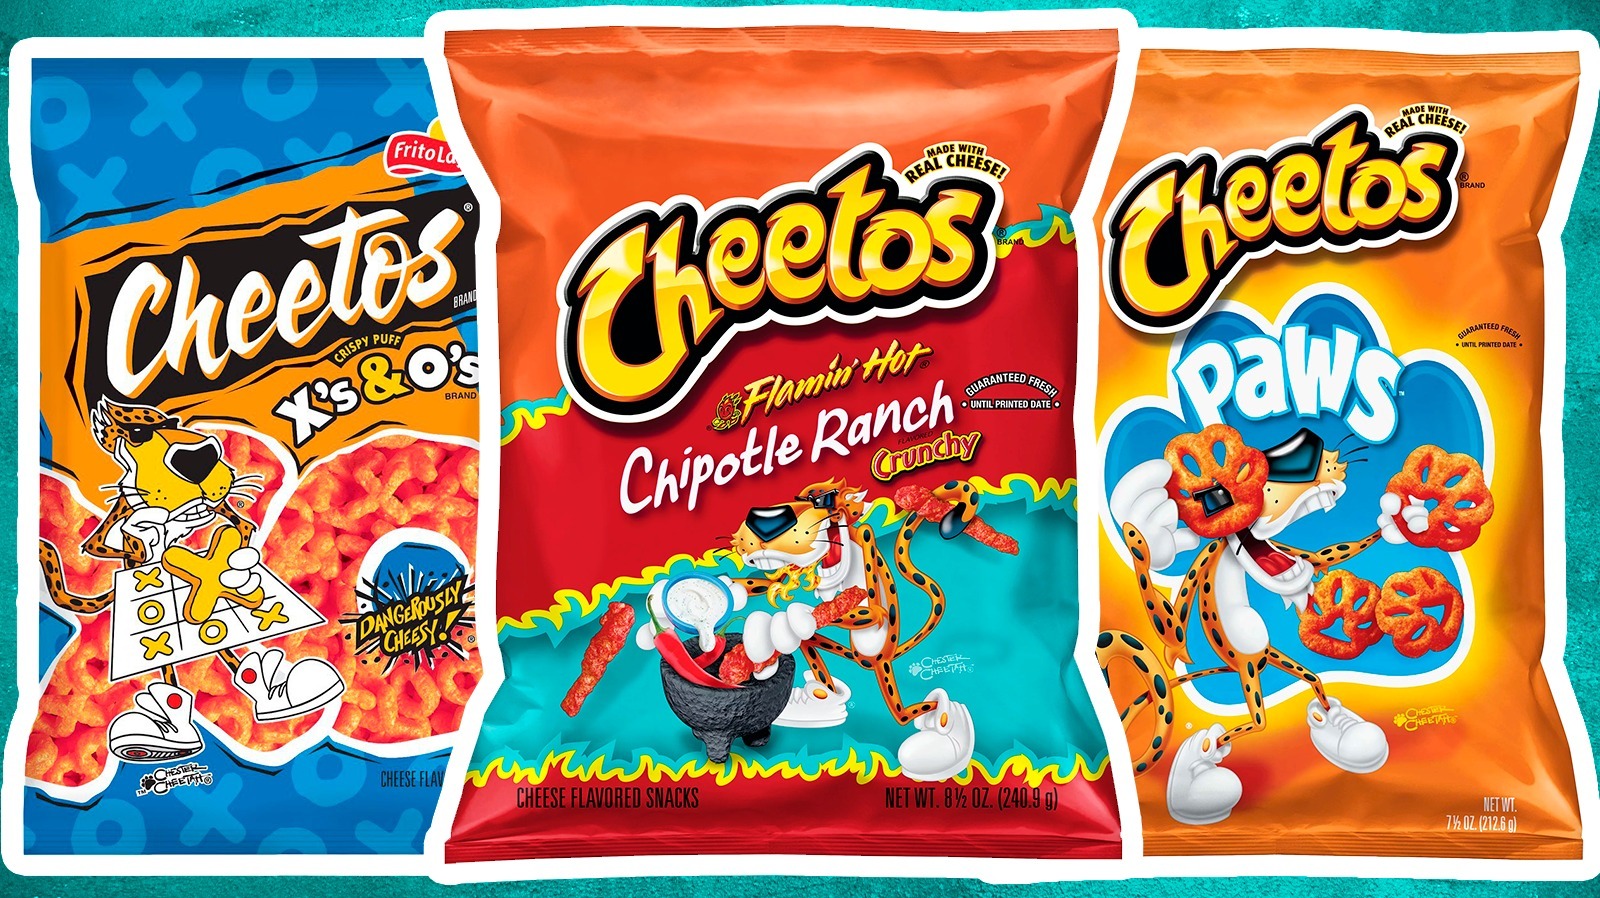 We Tried Cheetos Crunchy Buffalo To See If They Really Taste Like